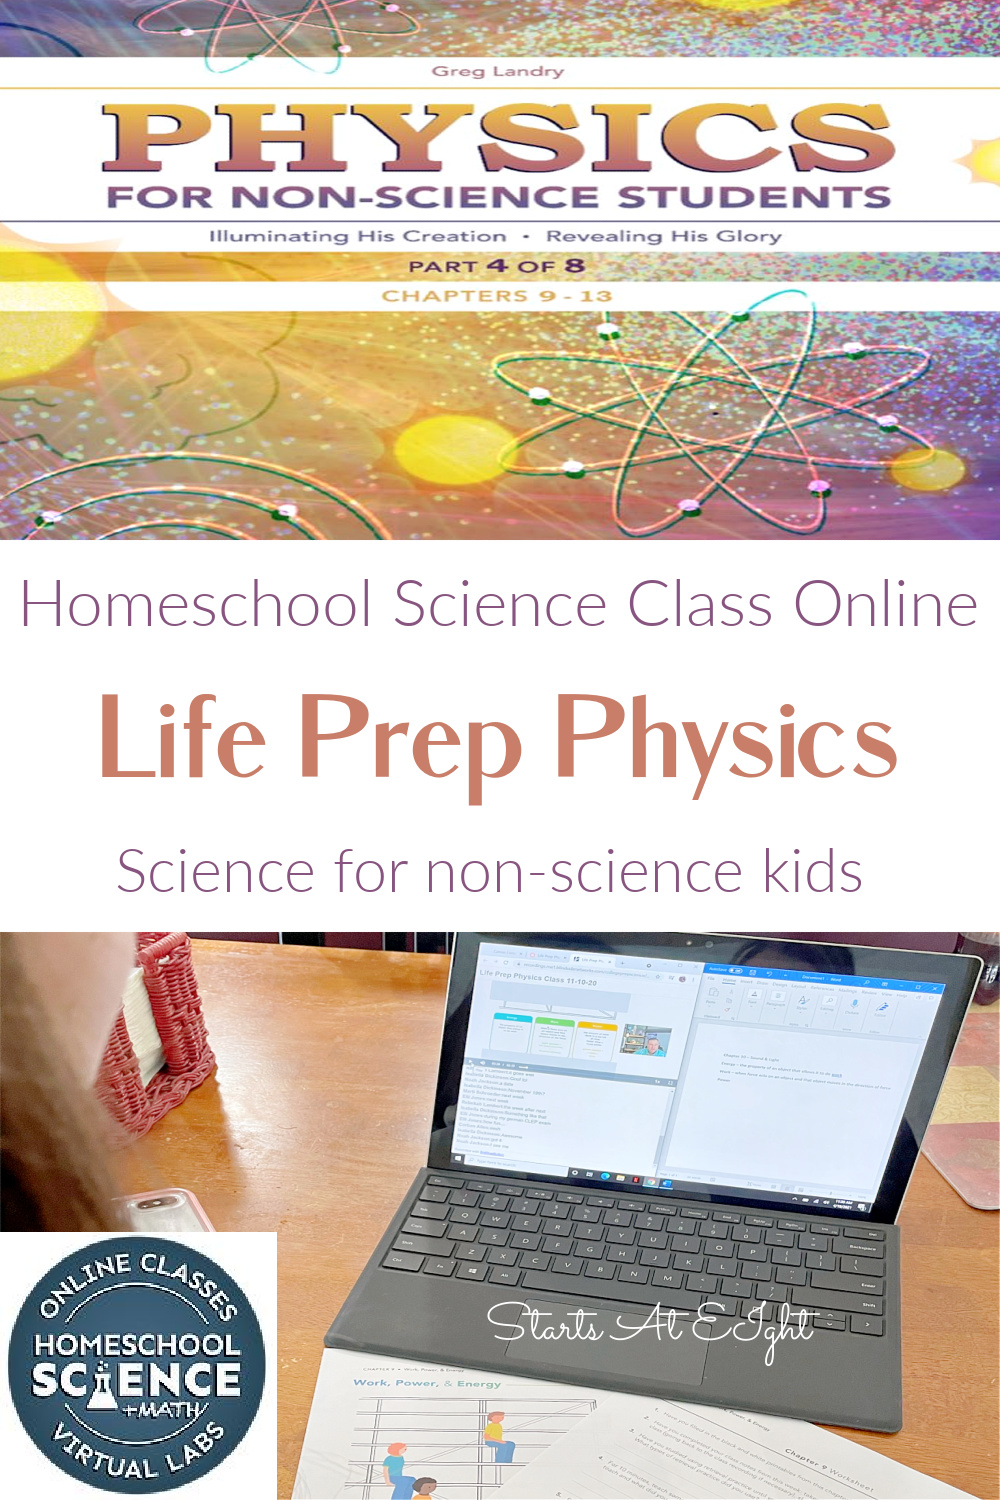 Homeschool Science Class Online with College Prep Science's live science classes for middle and high school. Life Prep Physics is perfect for your non-science kids! A Review from Starts At Eight